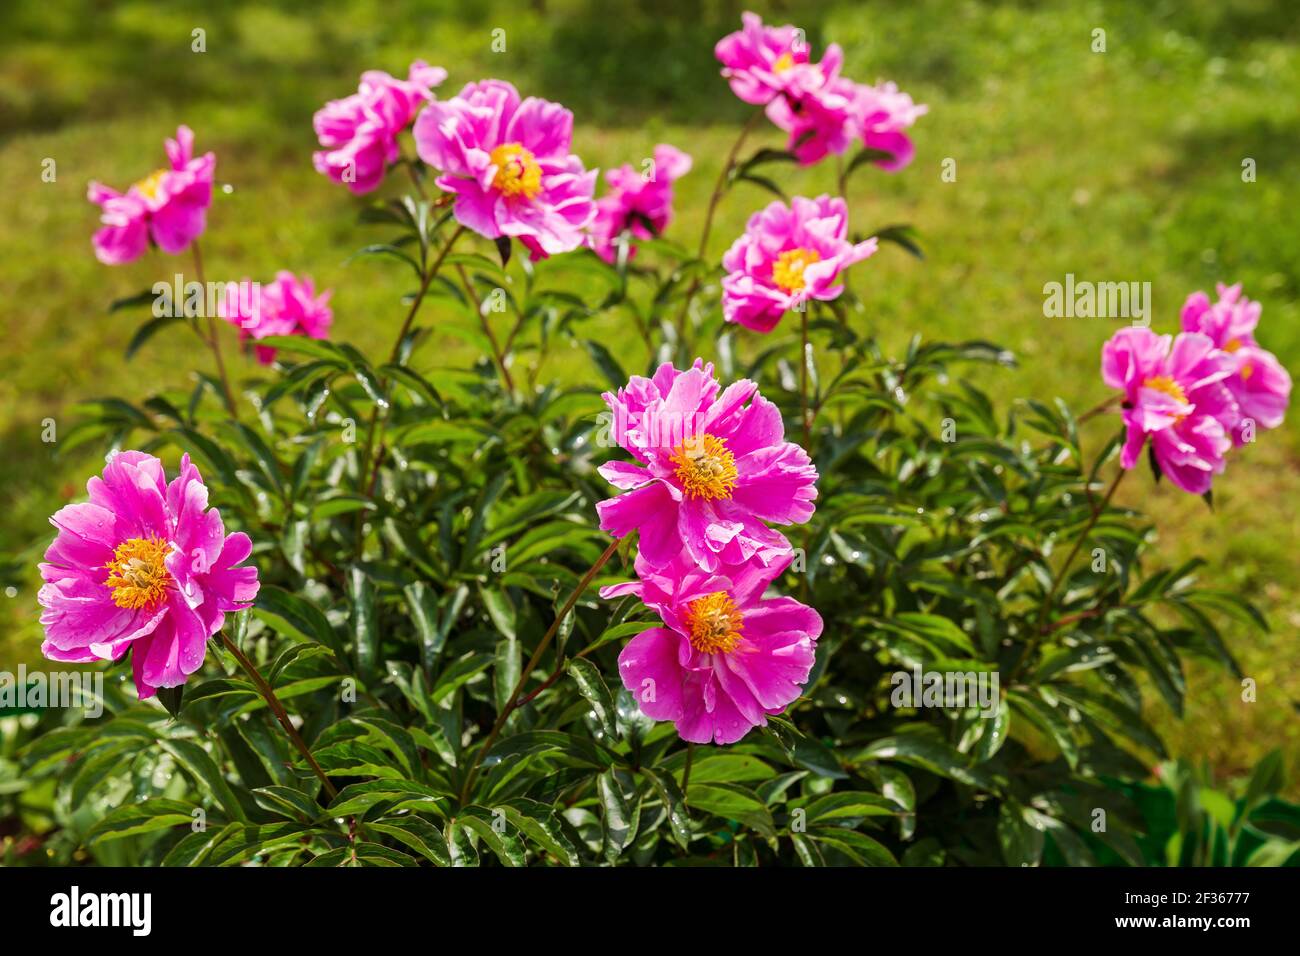 Blooming peony bush with simple bright pink flowers Stock Photo